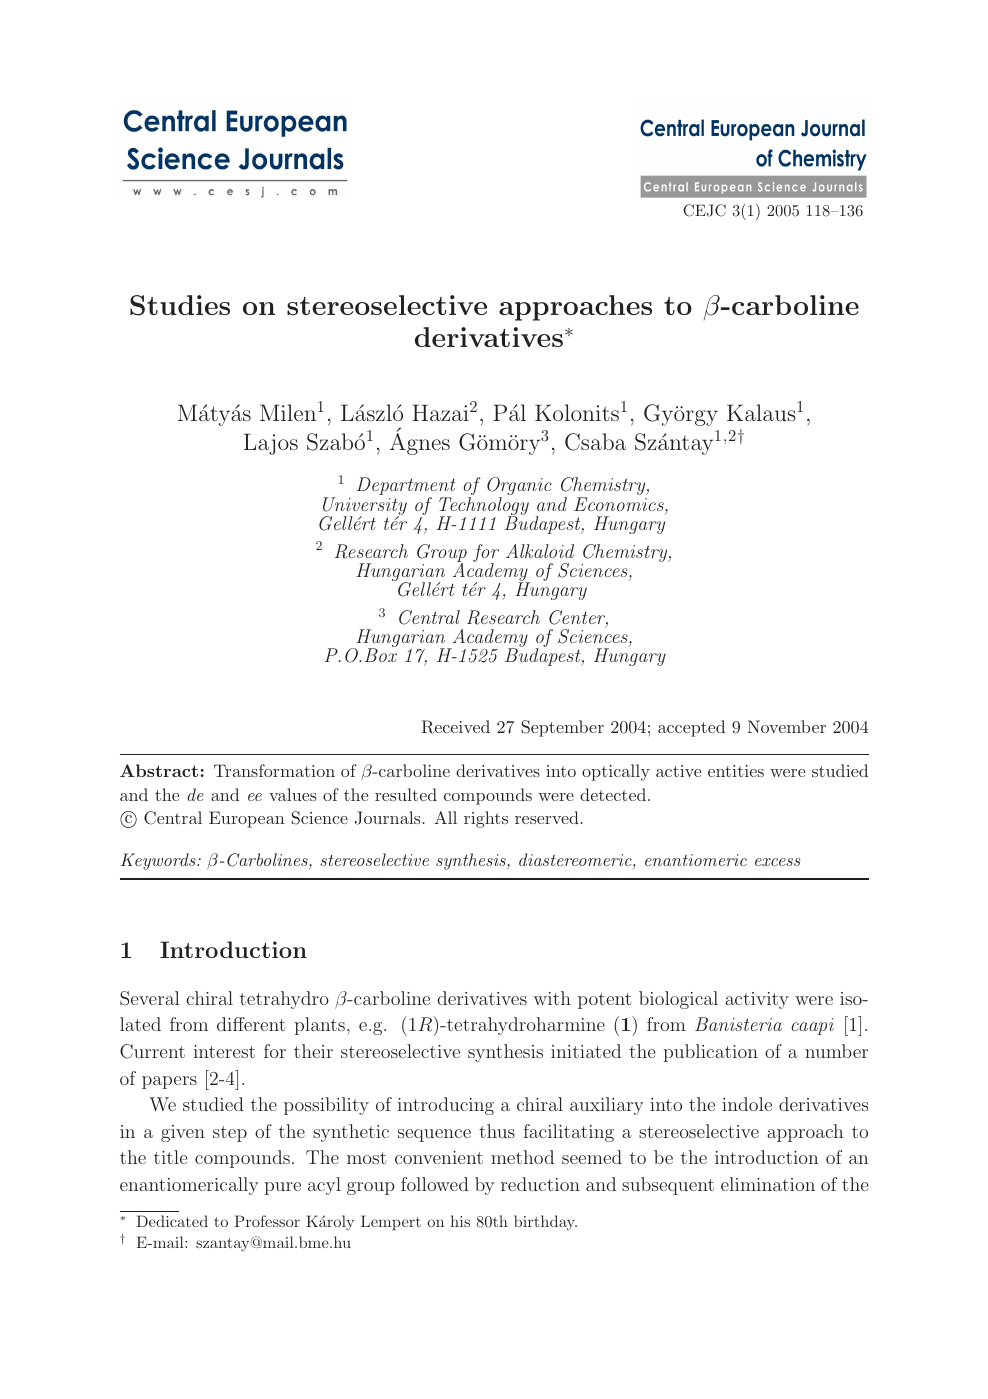 Studies On Stereoselective Approaches To B Carboline Derivatives Topic Of Research Paper In Chemical Sciences Download Scholarly Article Pdf And Read For Free On Cyberleninka Open Science Hub